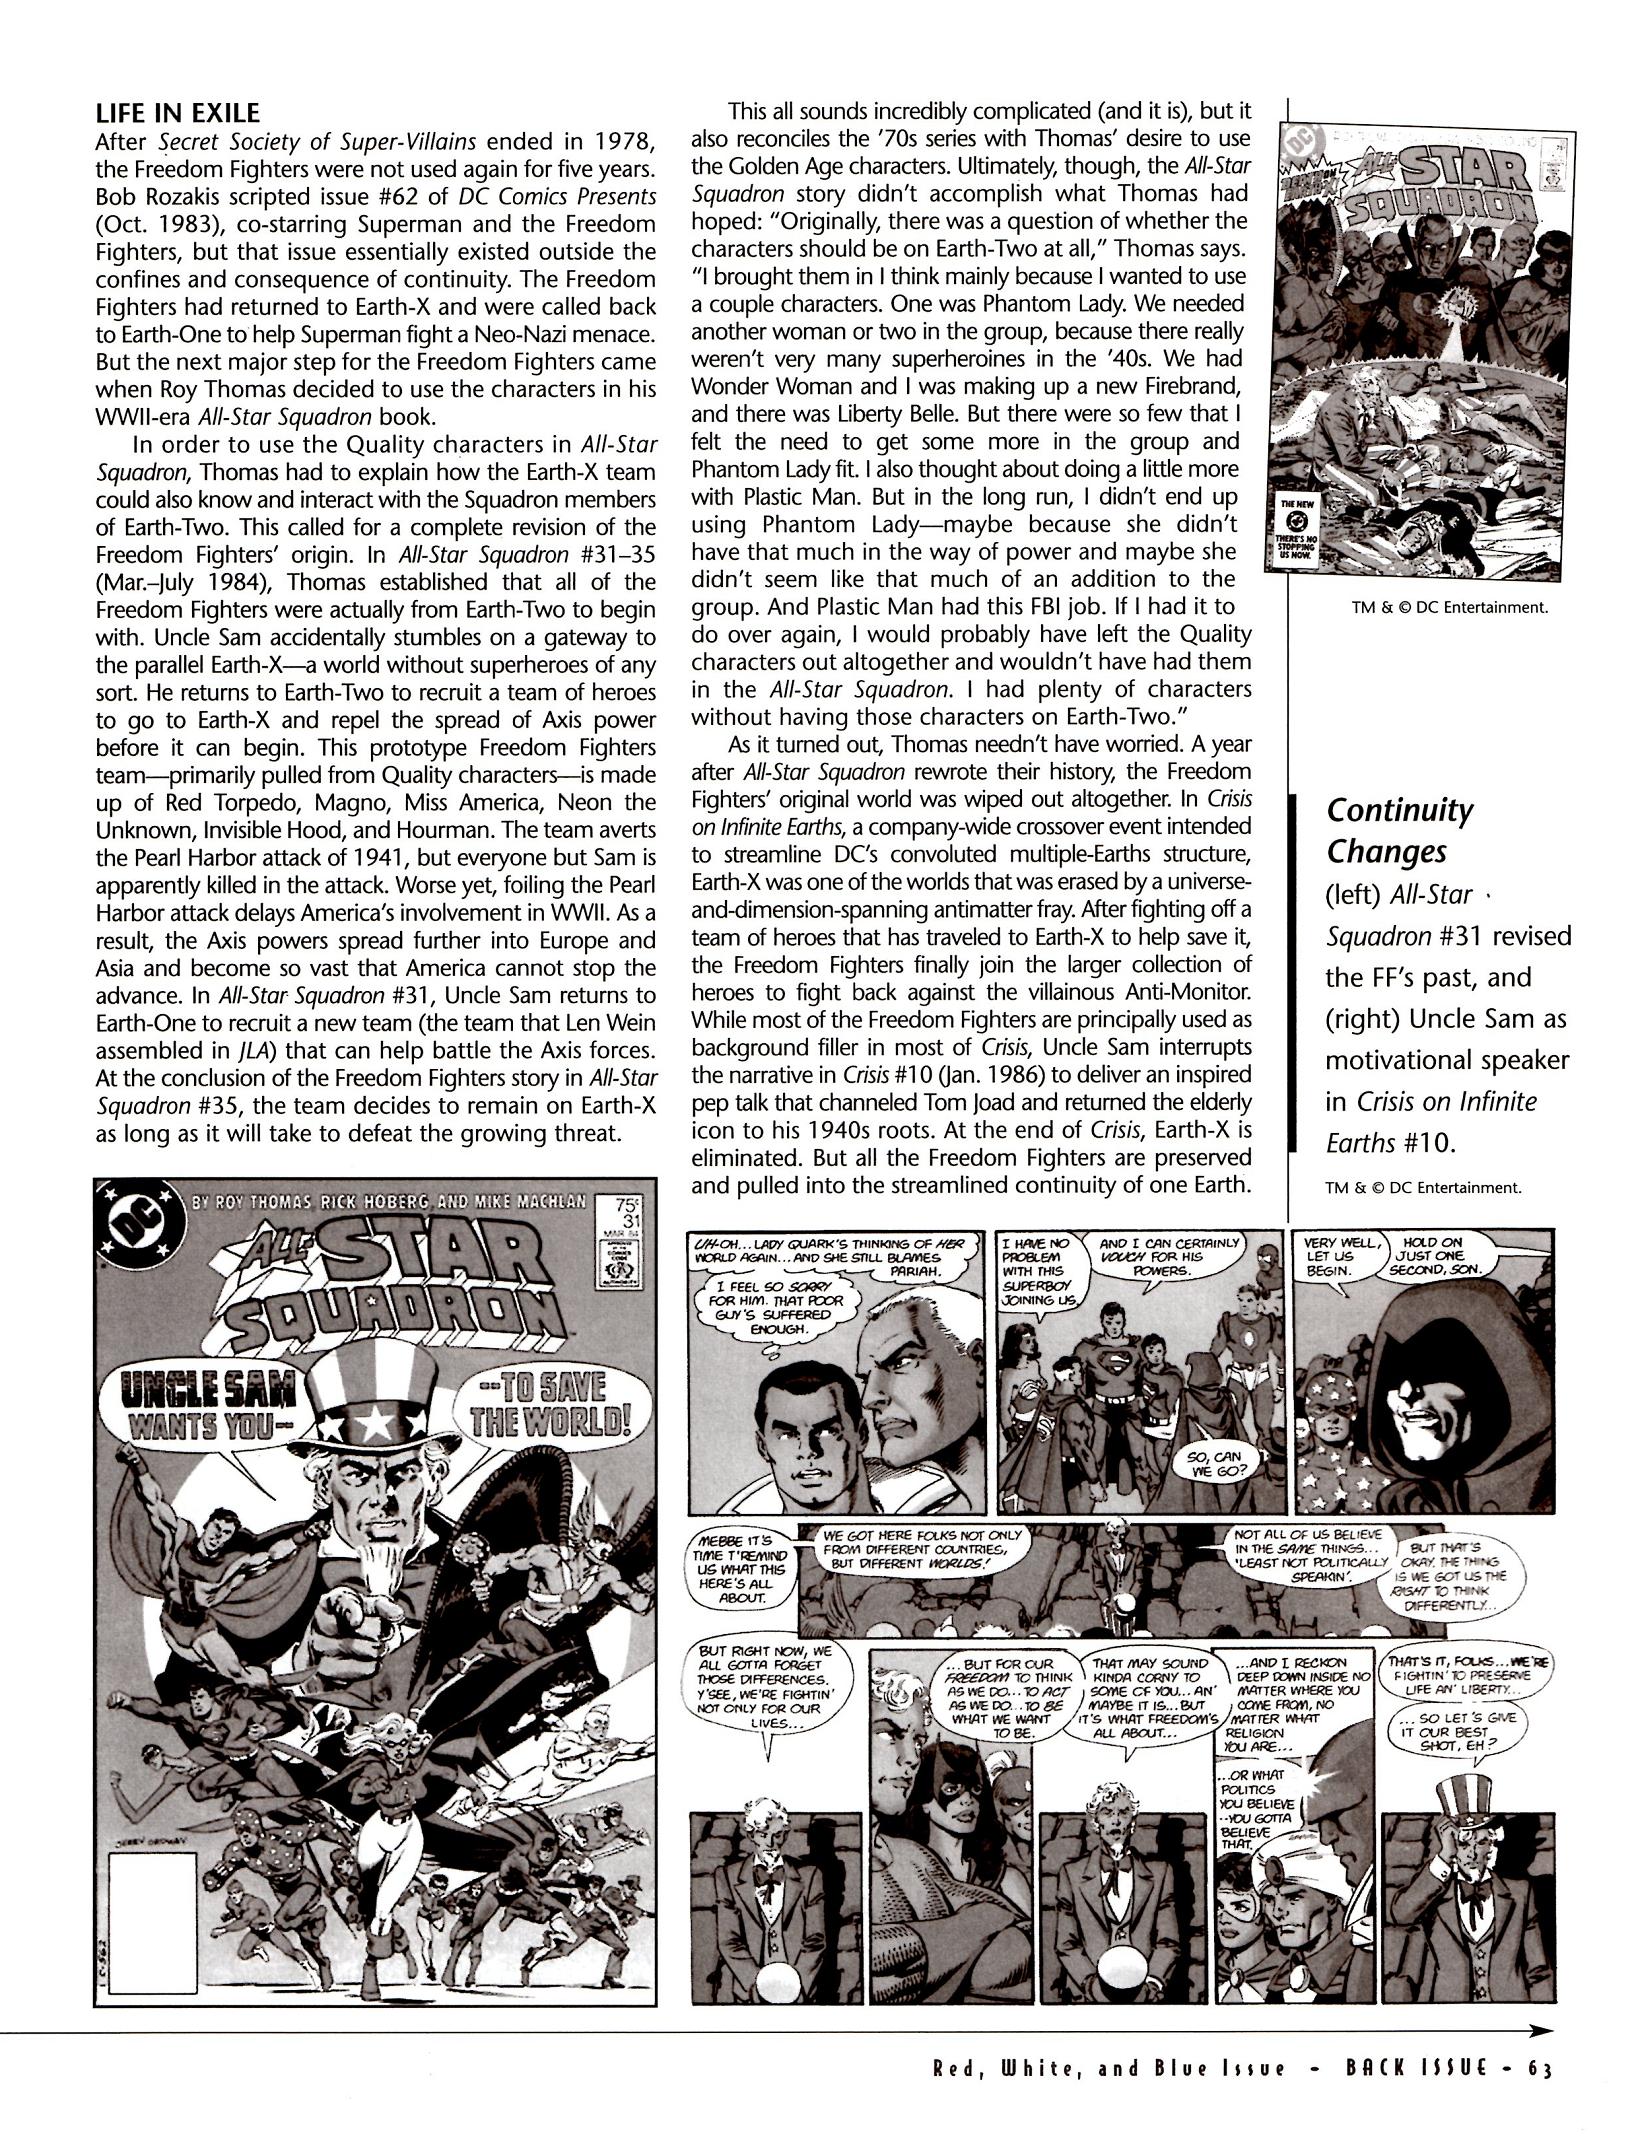 Read online Back Issue comic -  Issue #41 - 65